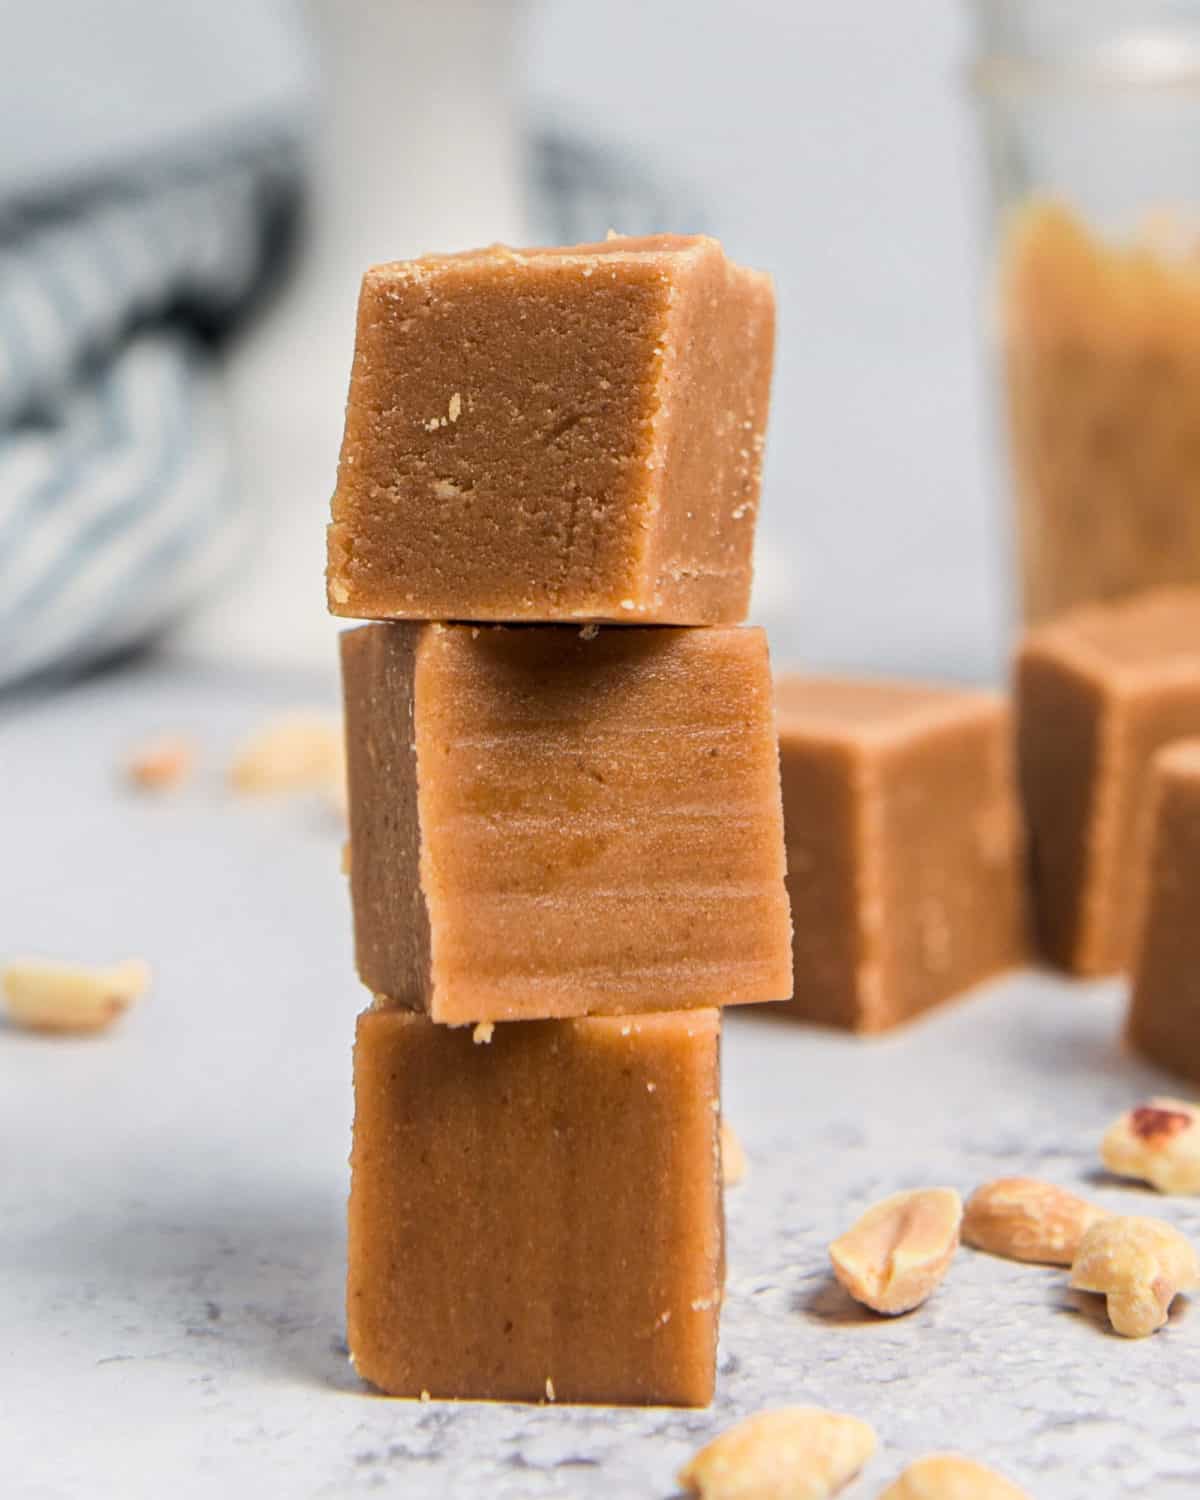 Three fudge pieces stacked on top of each other.